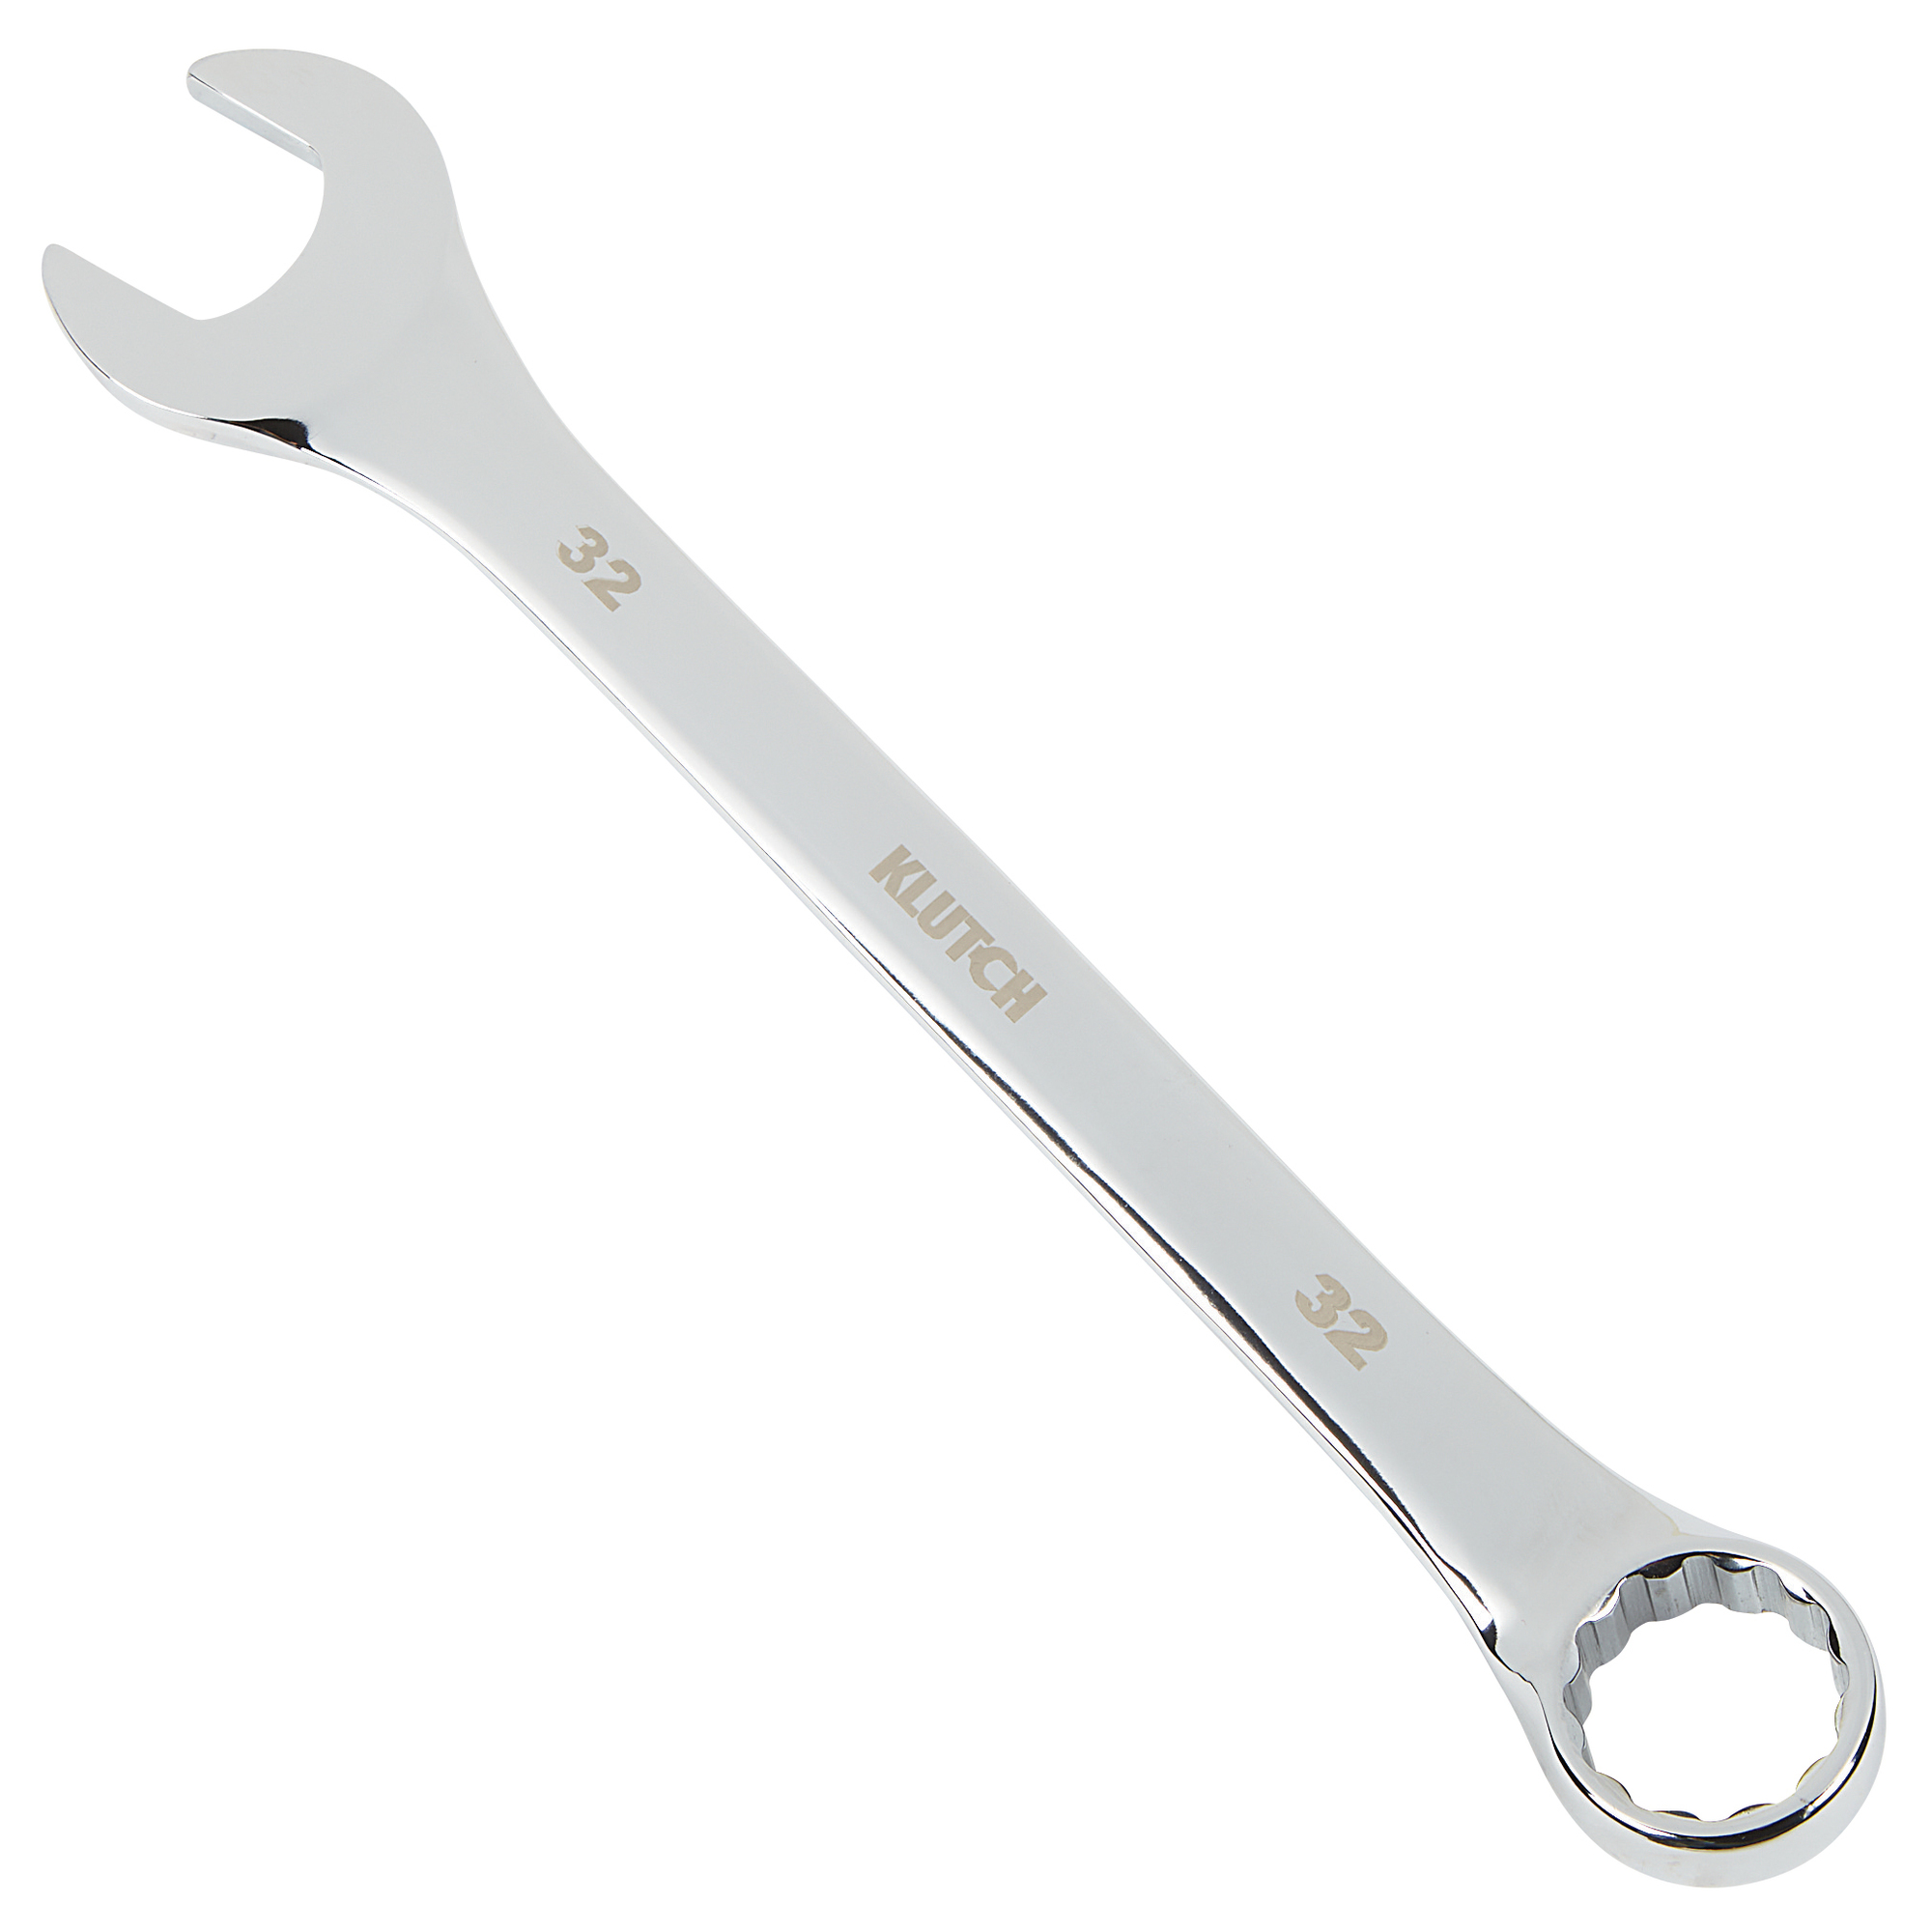 Klutch Metric Combination Wrench, 32mm x 12.4Inch, Model E-2004